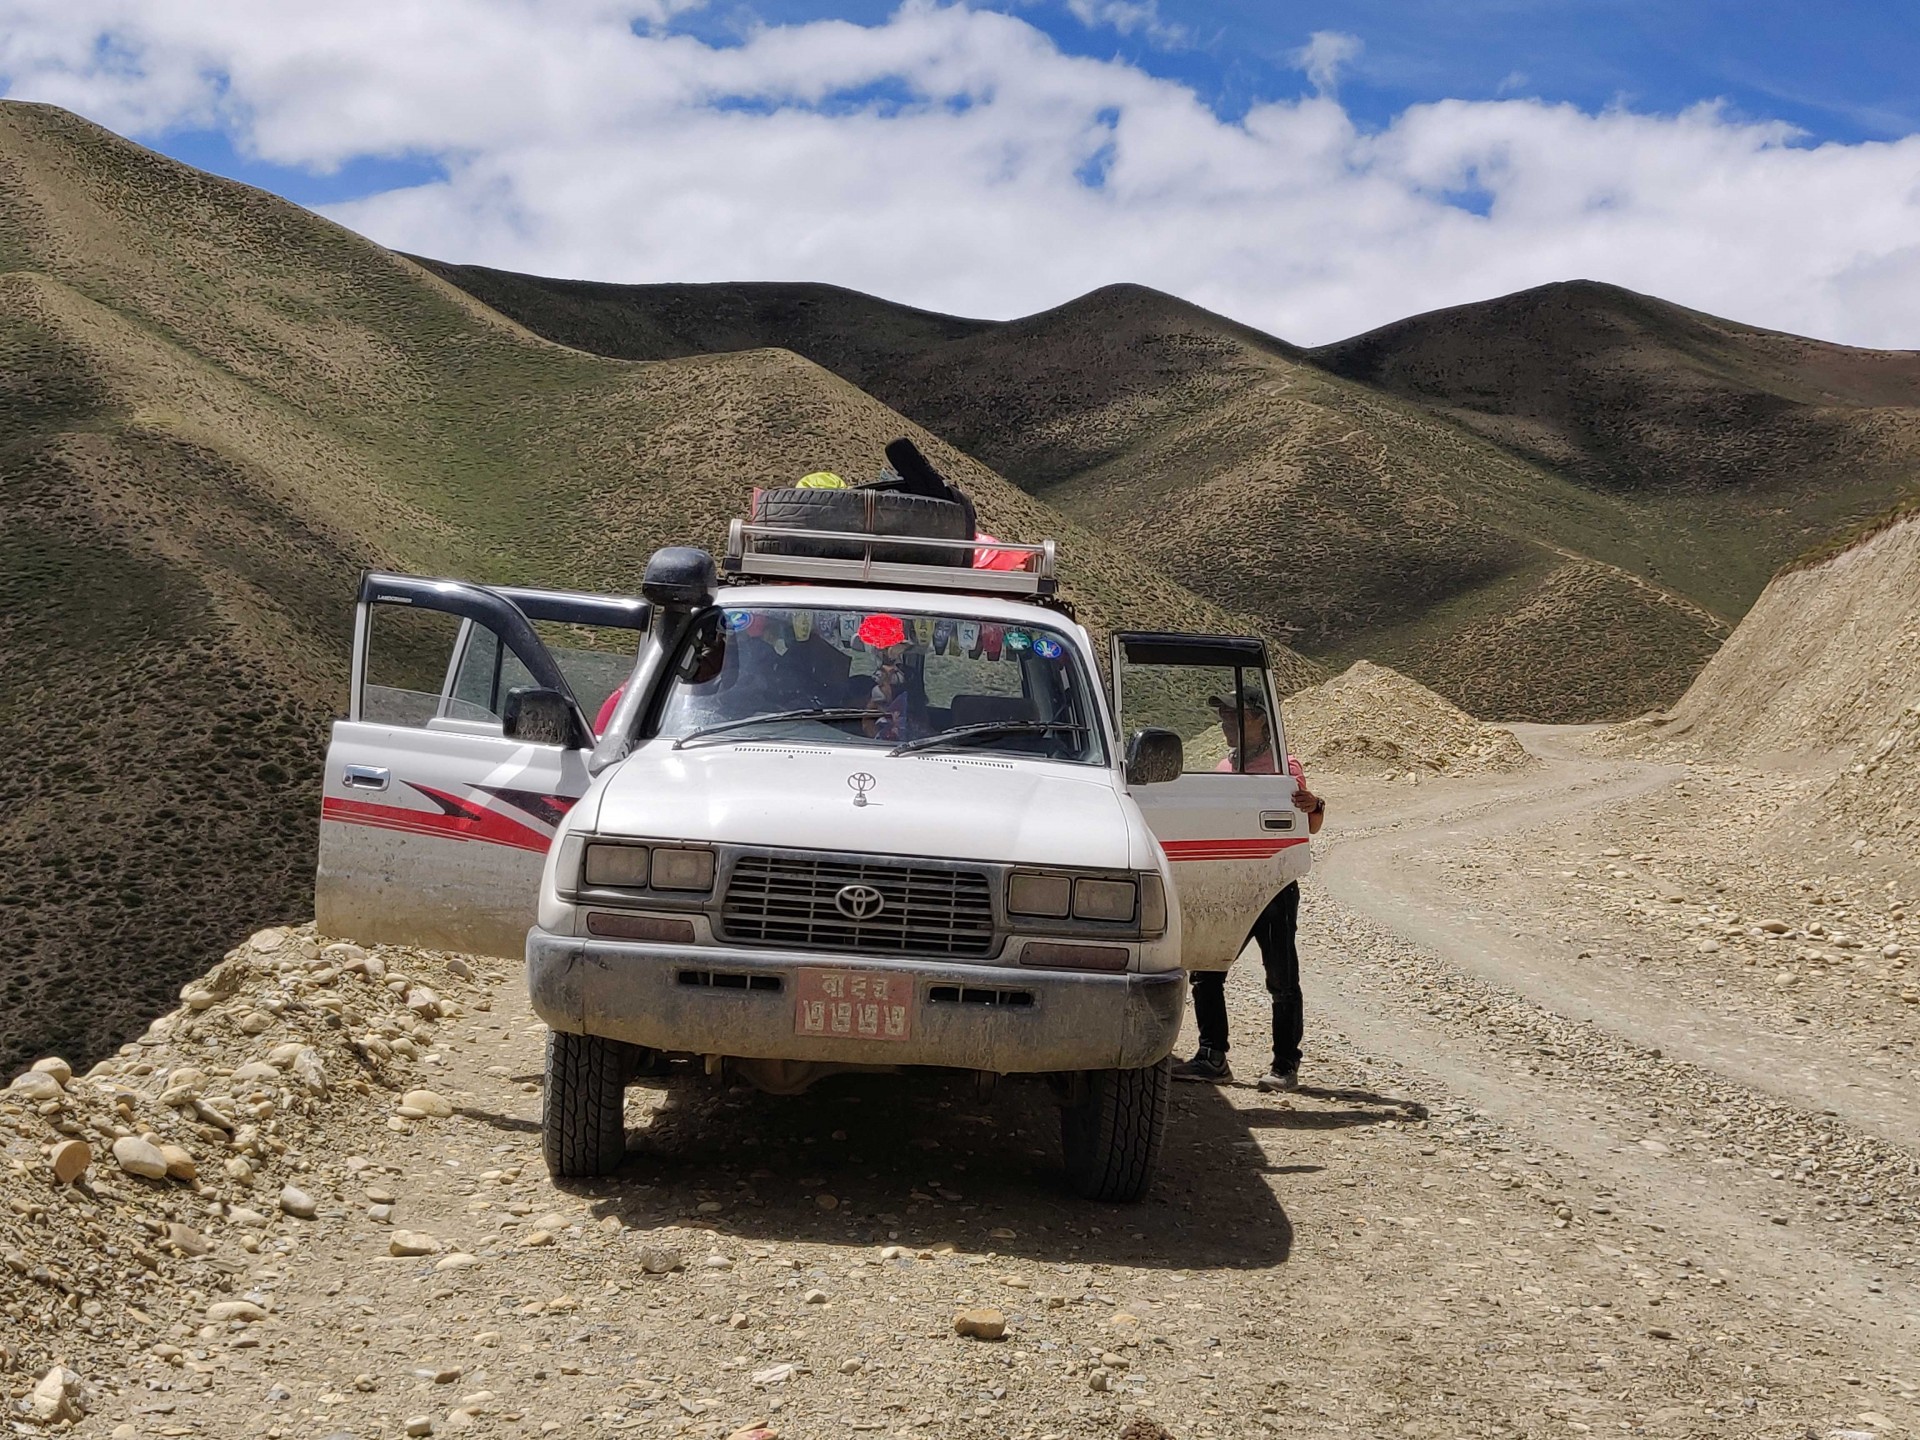 4x4 Jeep Tour Lo-Manthang, Mustang 11N/12D